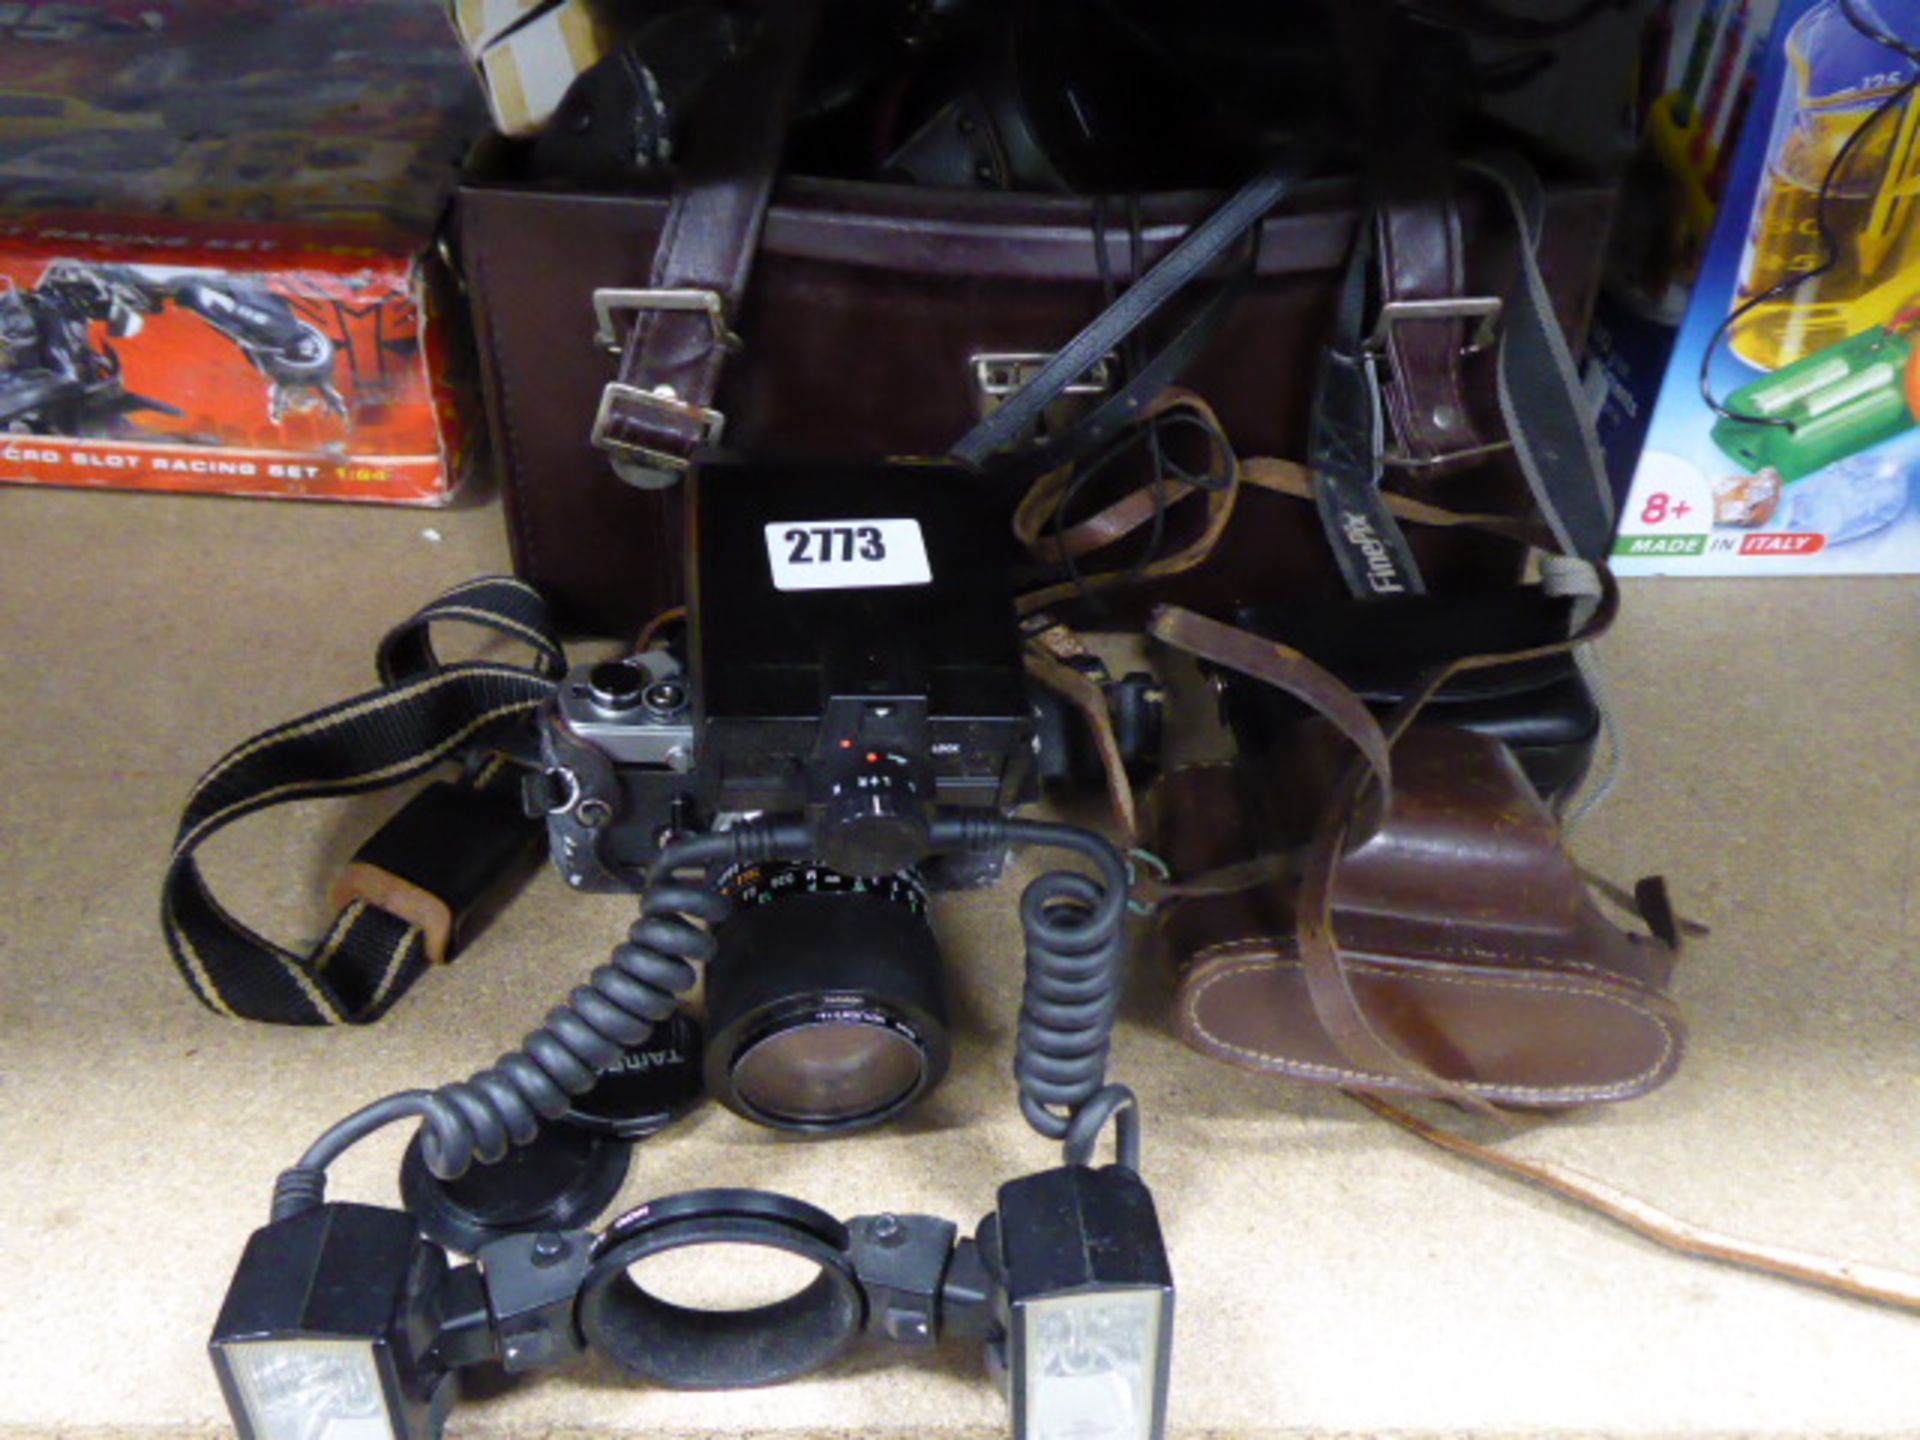 Large selection of vintage camera equipment in leather holdall inc. Olympus OM1 camera, specialist